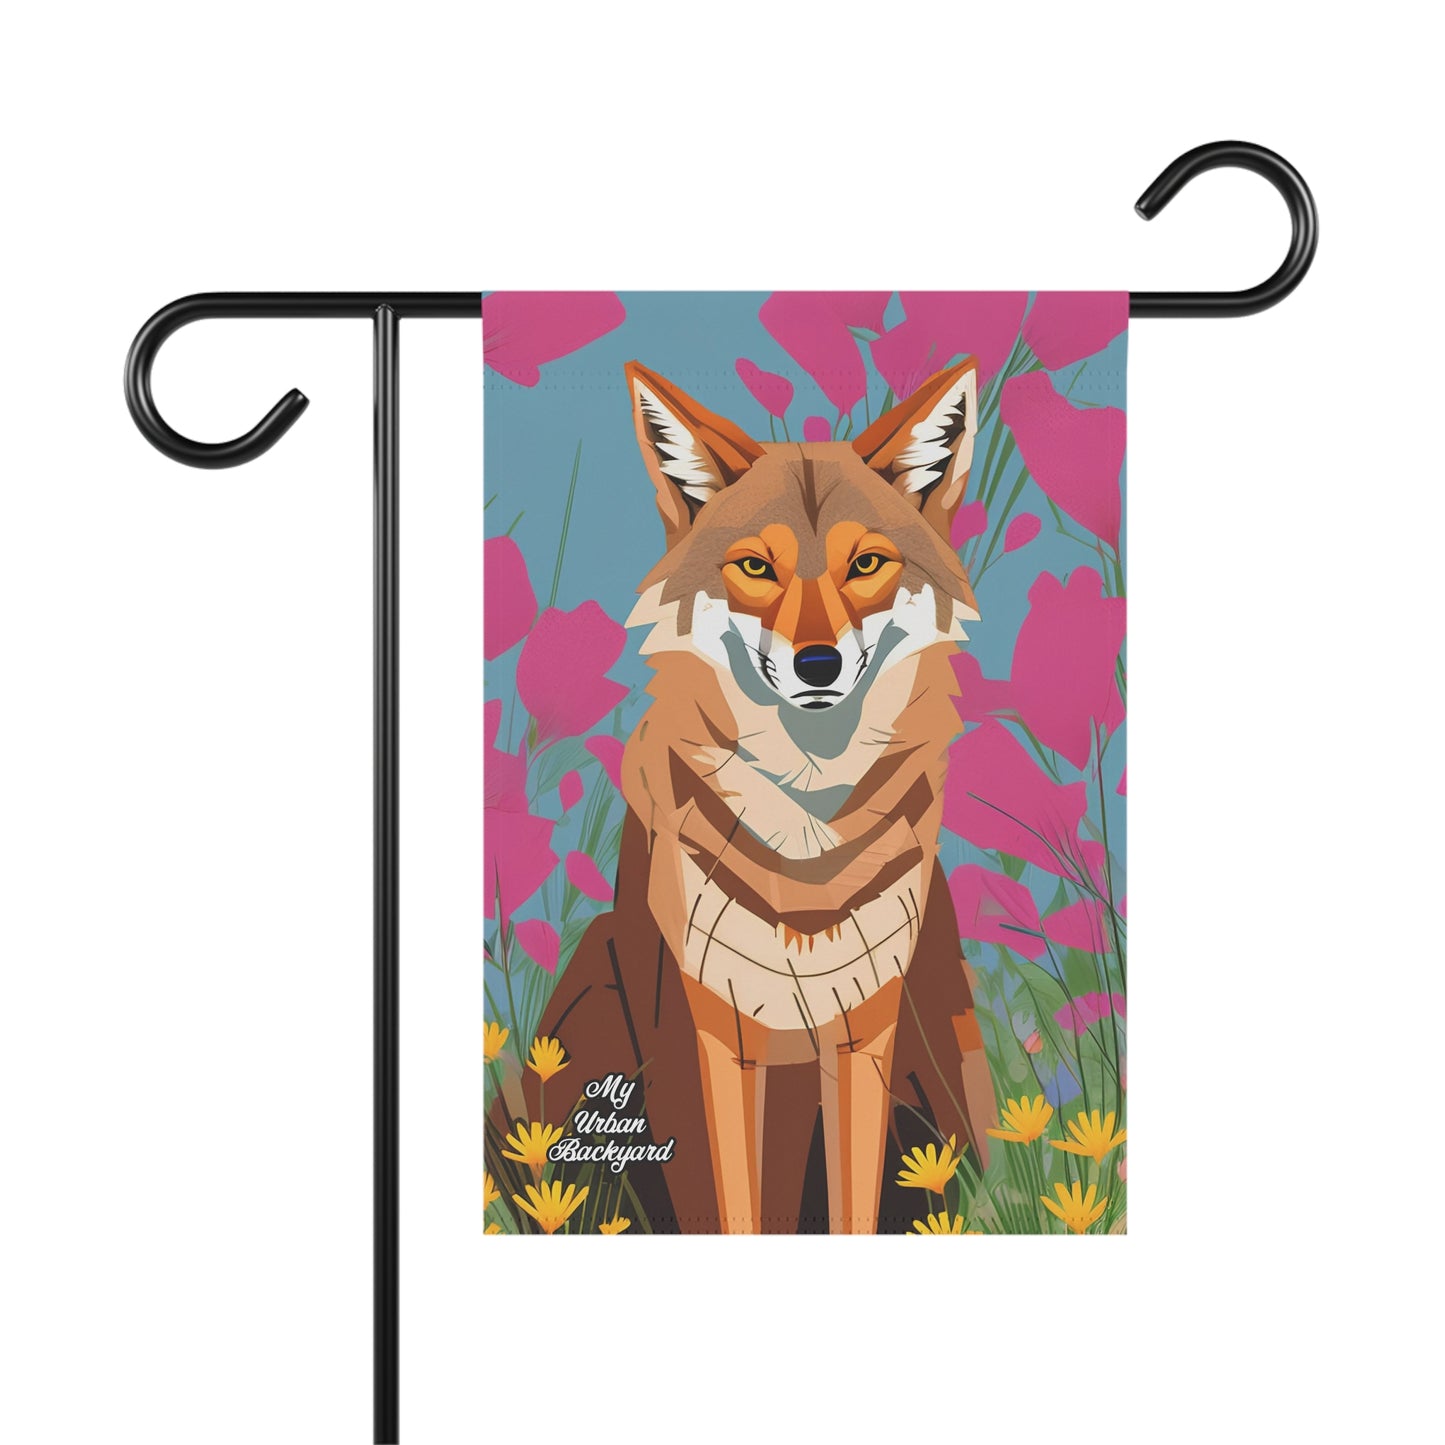 Coyote and Pink Flowers, Garden Flag for Yard, Patio, Porch, or Work, 12"x18" - Flag only